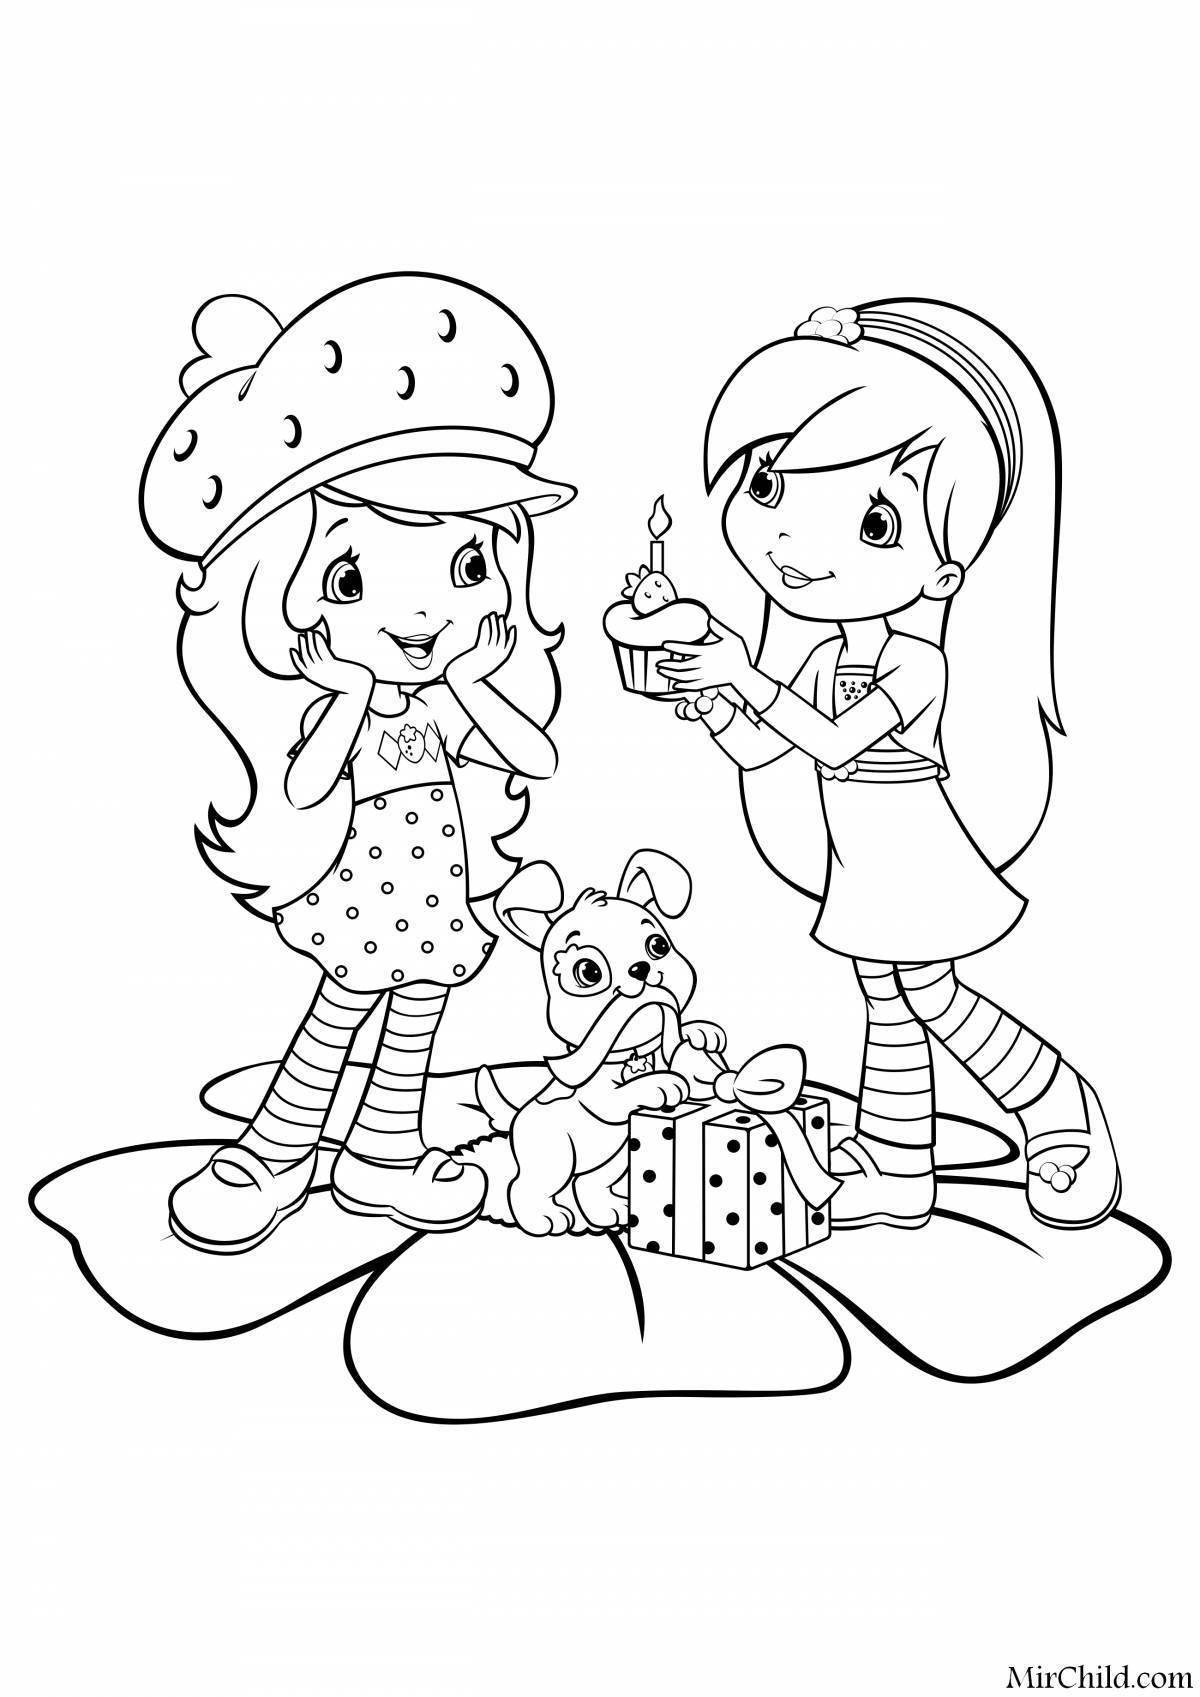 Color-wondrous happy birthday girl coloring page